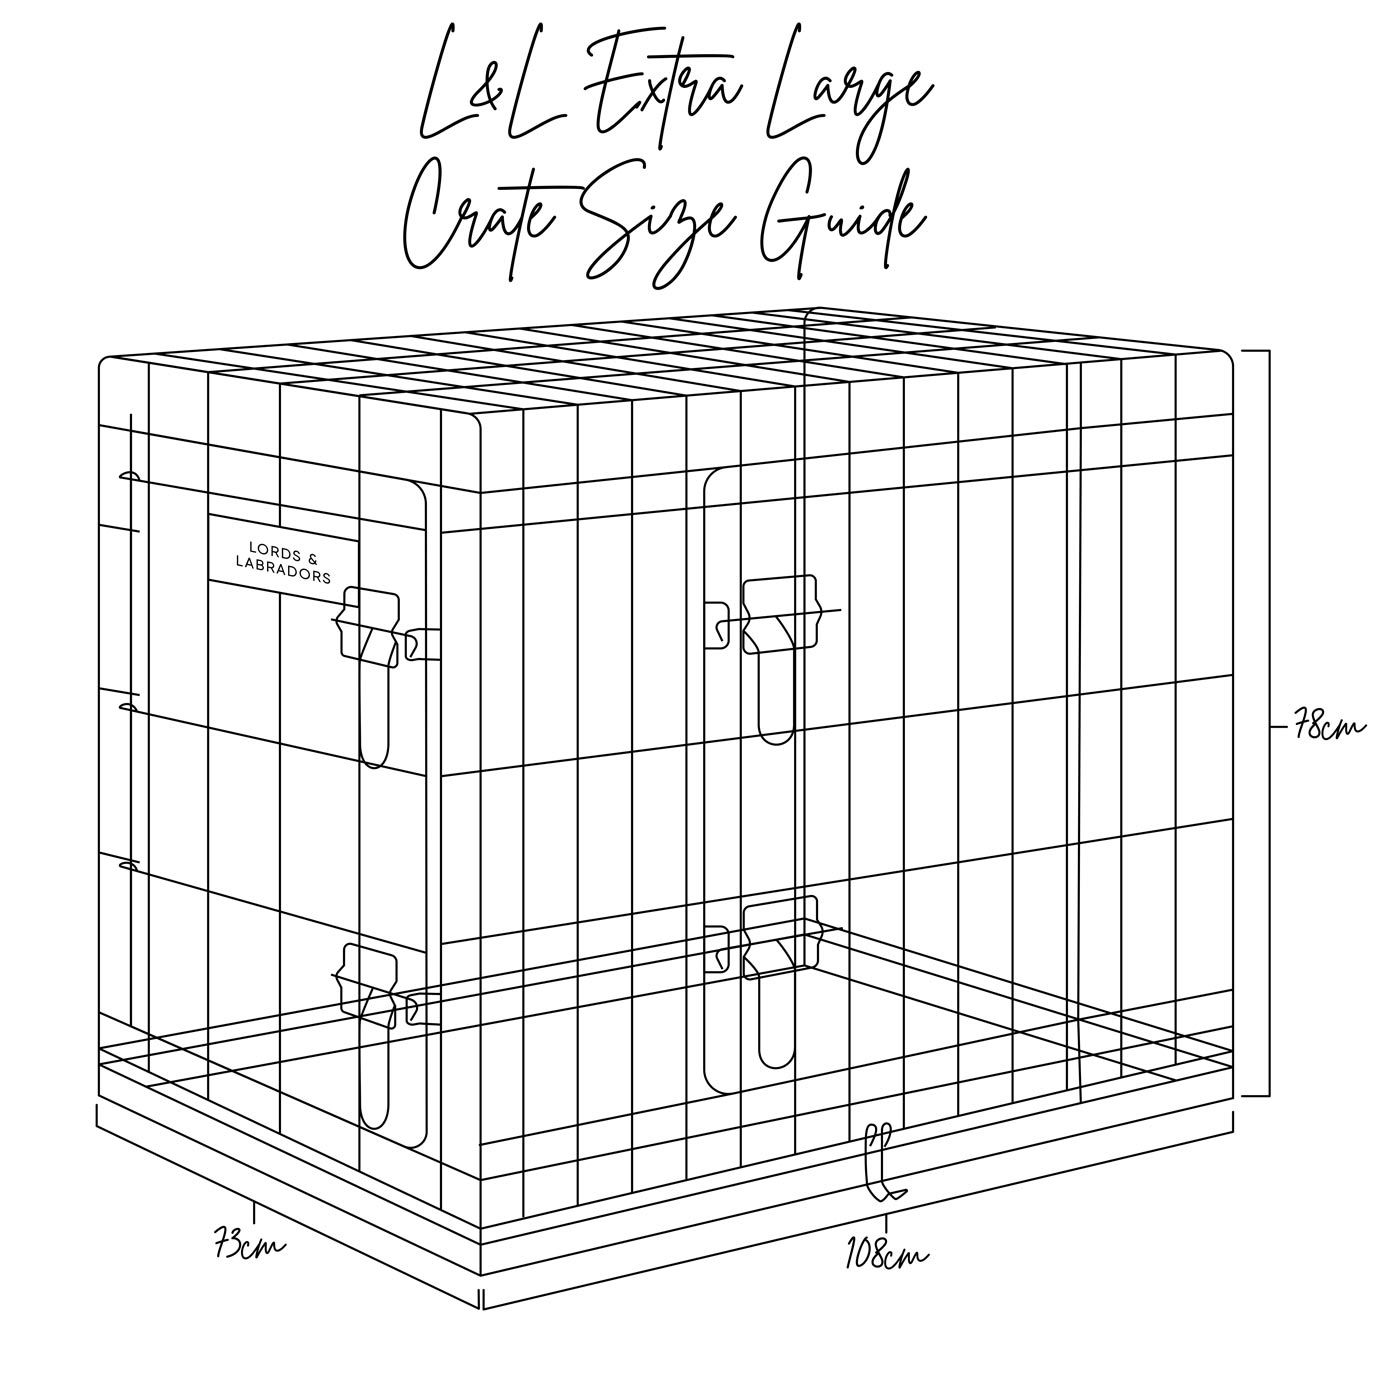 Discover the perfect deluxe heavy duty Gold dog cage, featuring two doors for easy access and a removable tray for easy cleaning! The ideal choice to keep new puppies safe, made using pet safe galvanised steel! Available now in 5 sizes and three stunning colors at Lords & Labradors US